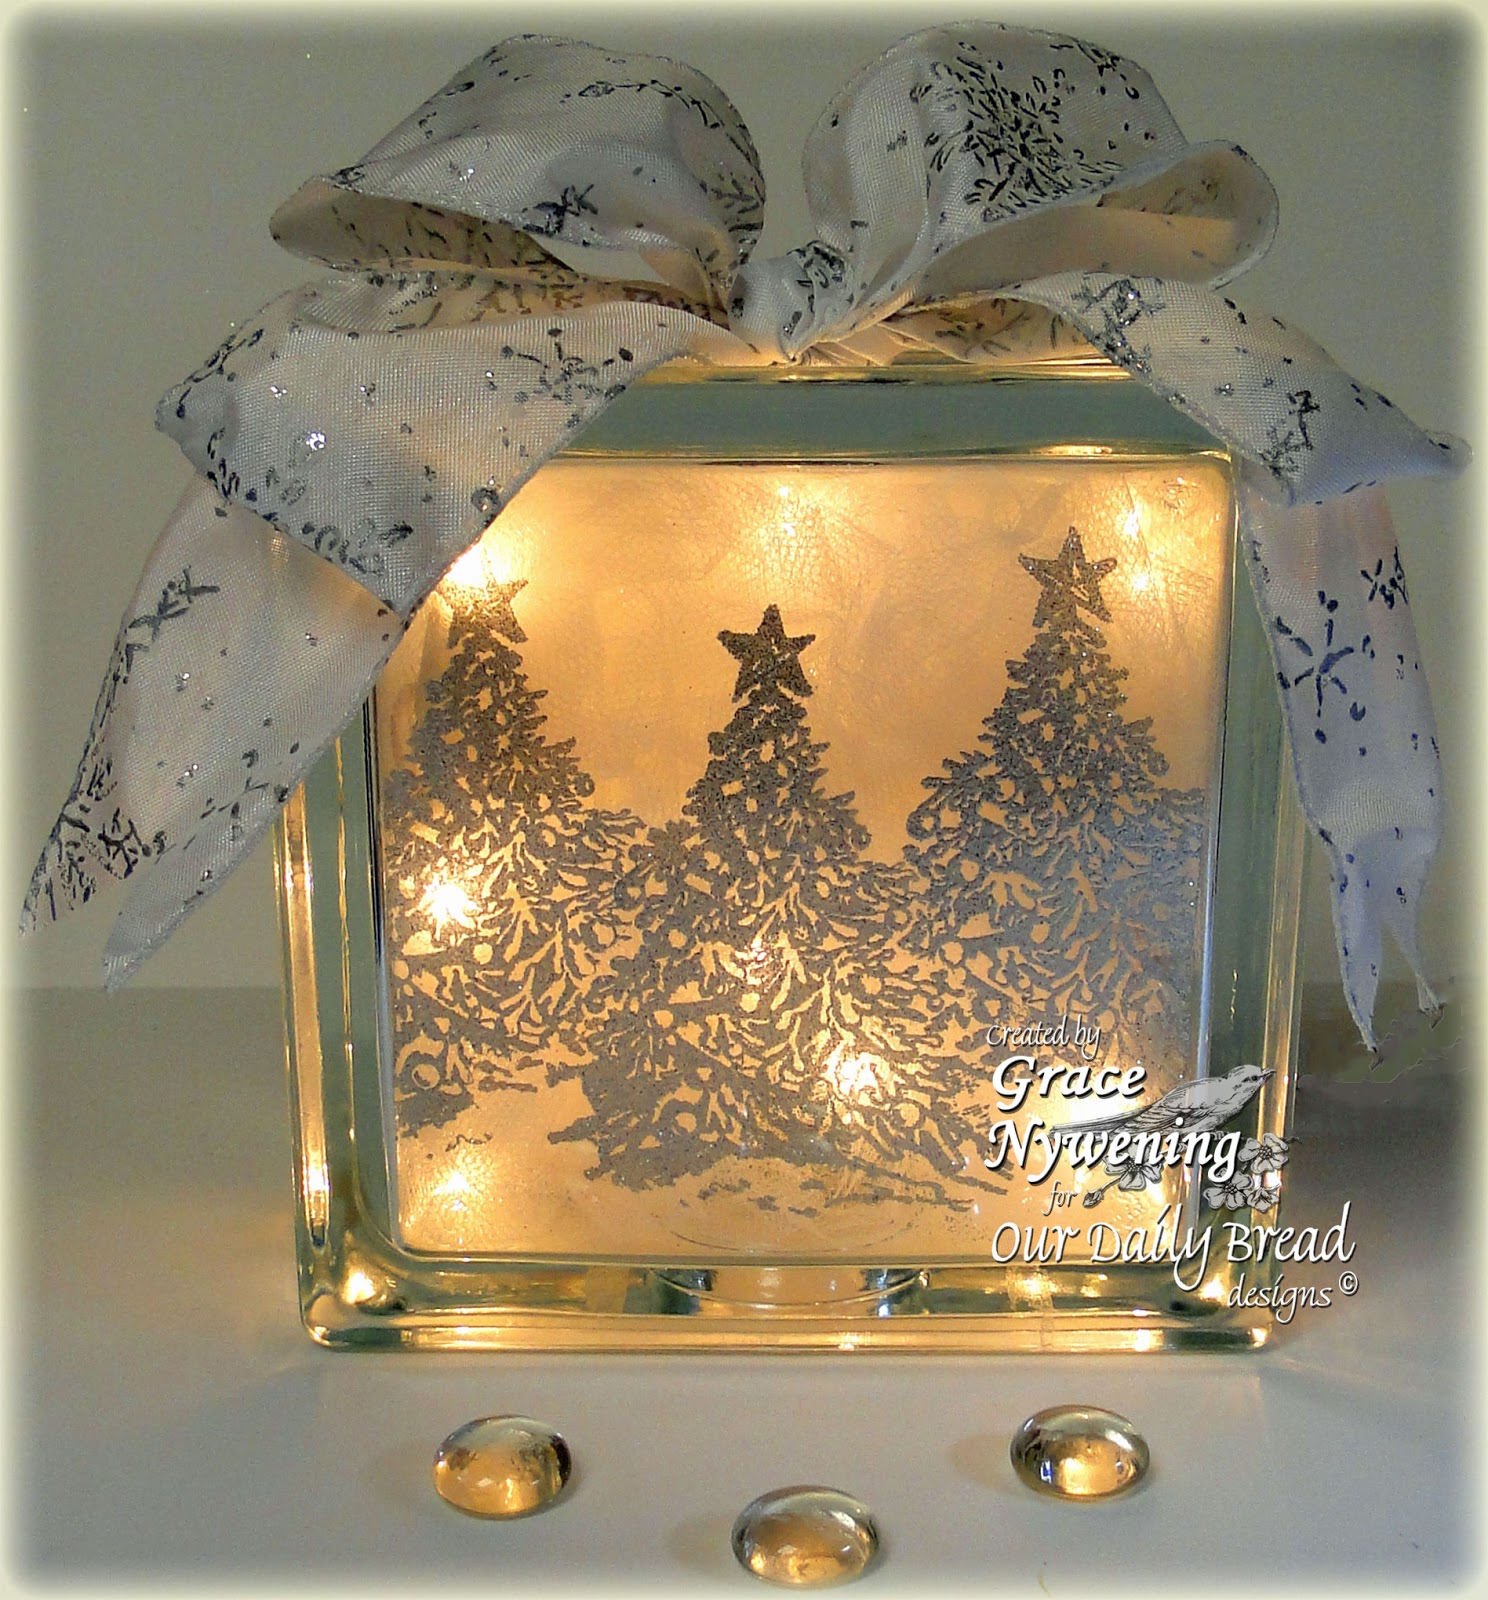 Th-INK-ing of You: A glass block gift idea!